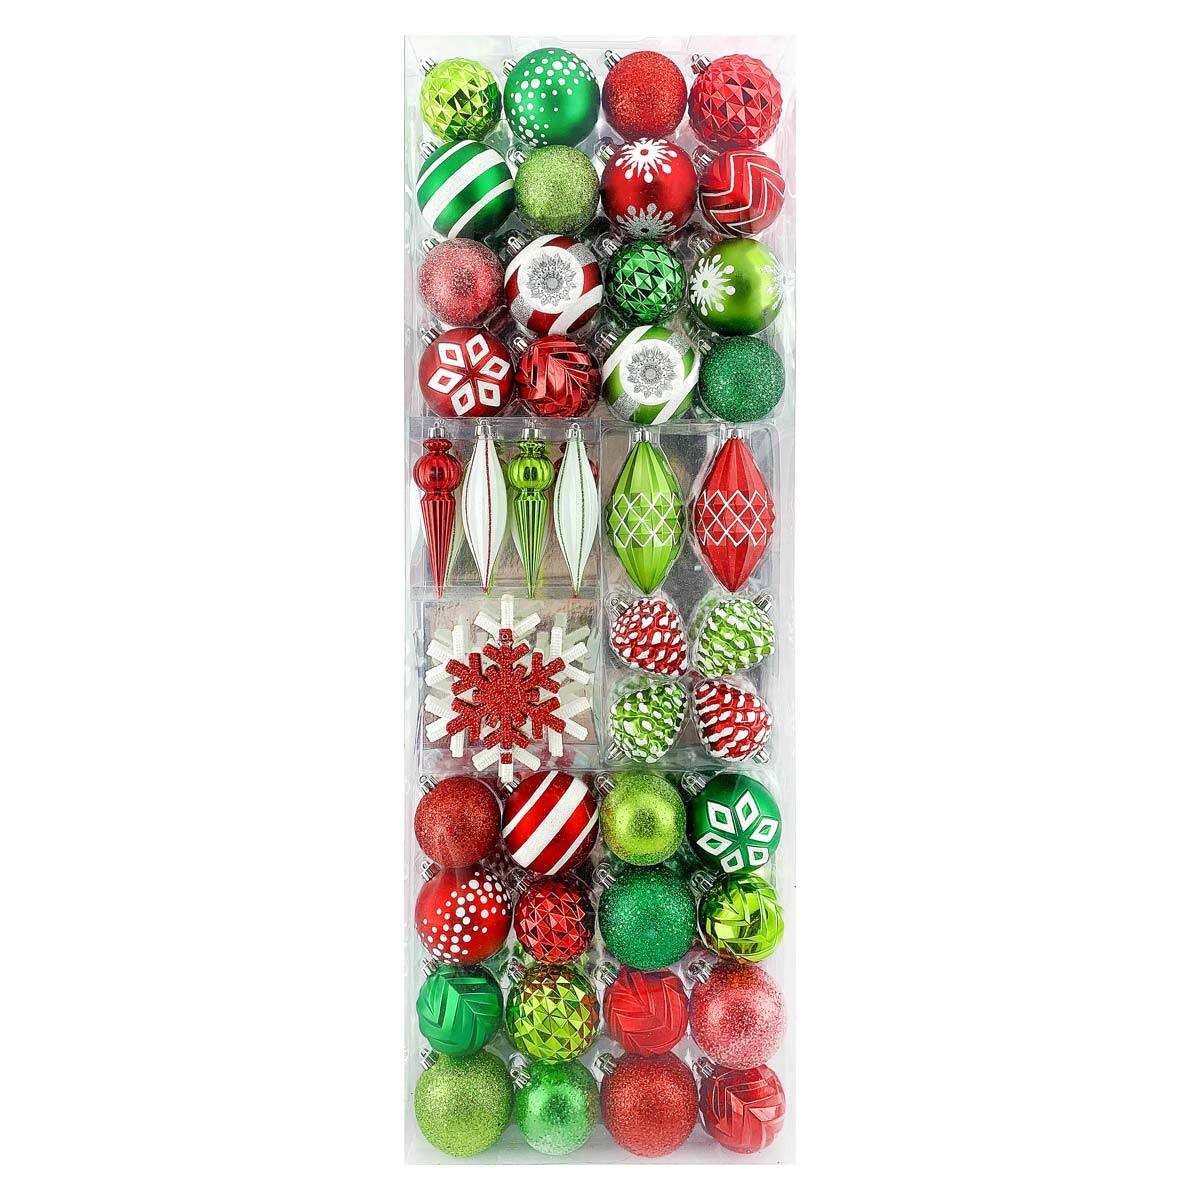 Beaumont 54pc Ornament Set Green Red